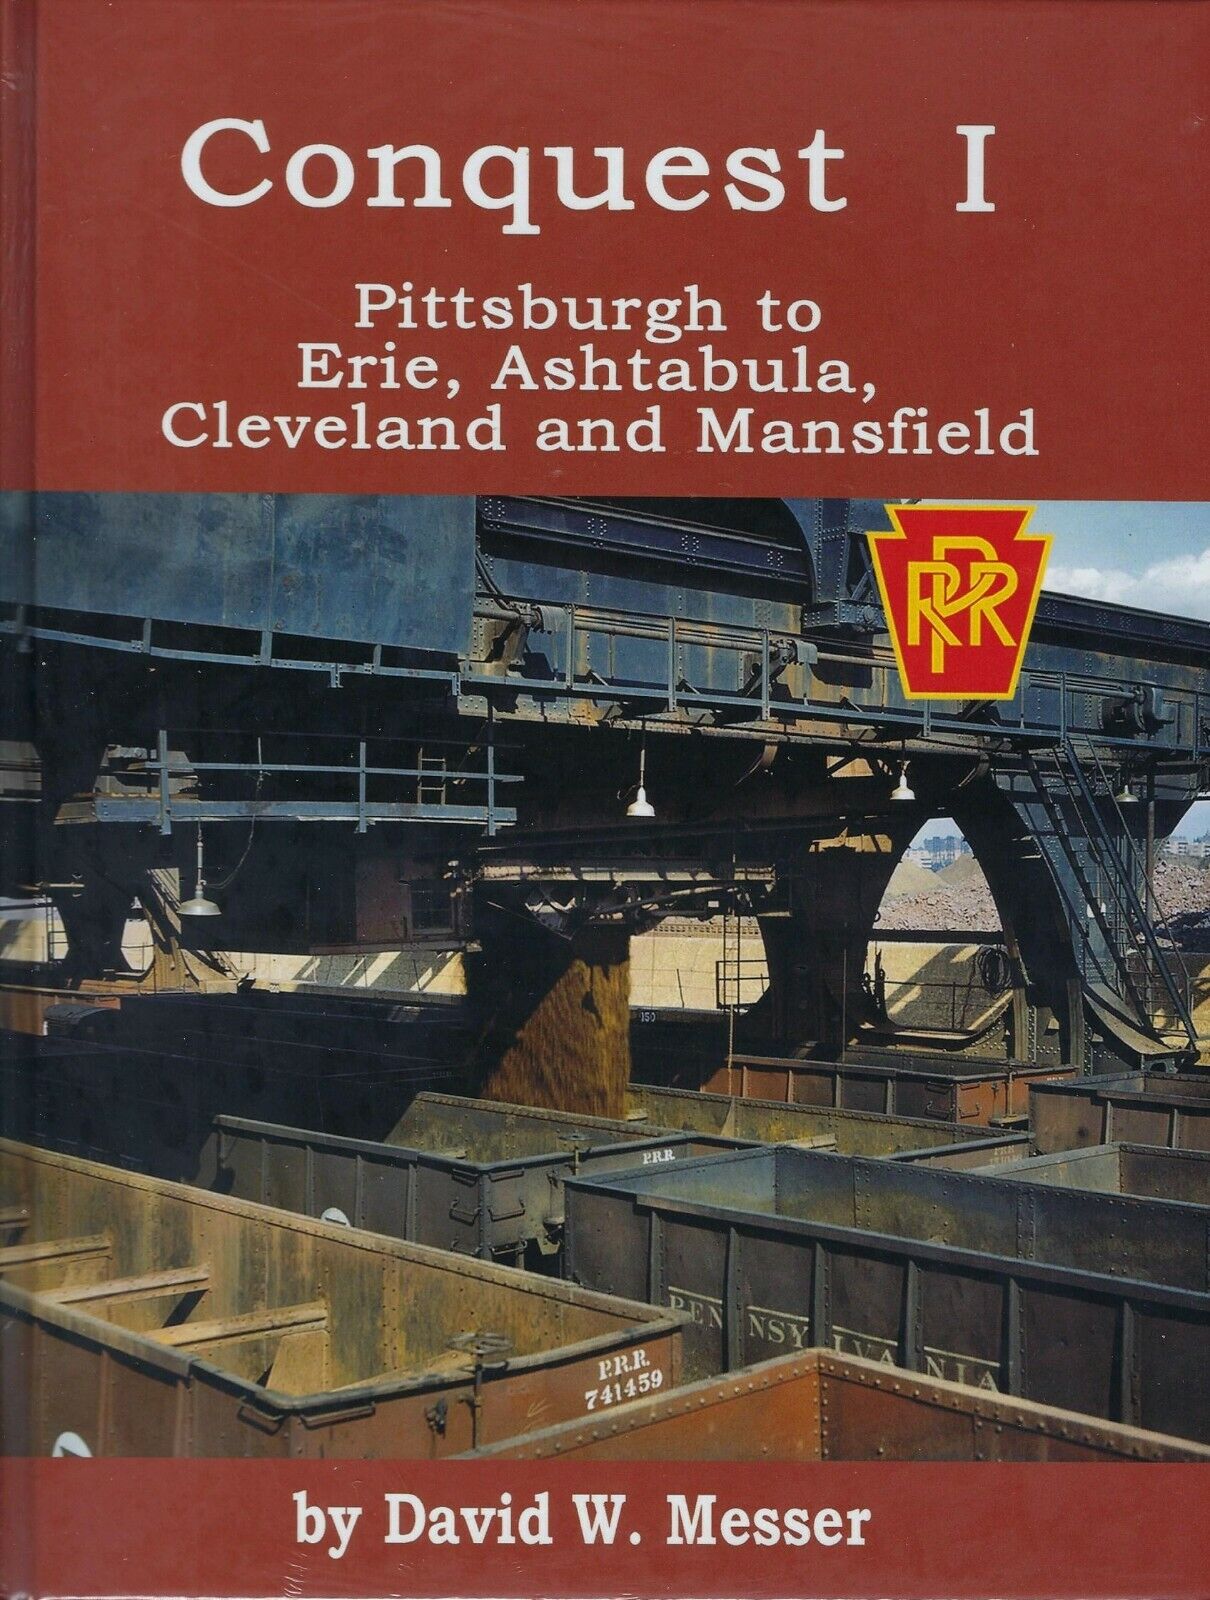 PRR Conquest I - Pittsburgh to Erie, Ashtabula, Cleveland & Mansfield (NEW BOOK)